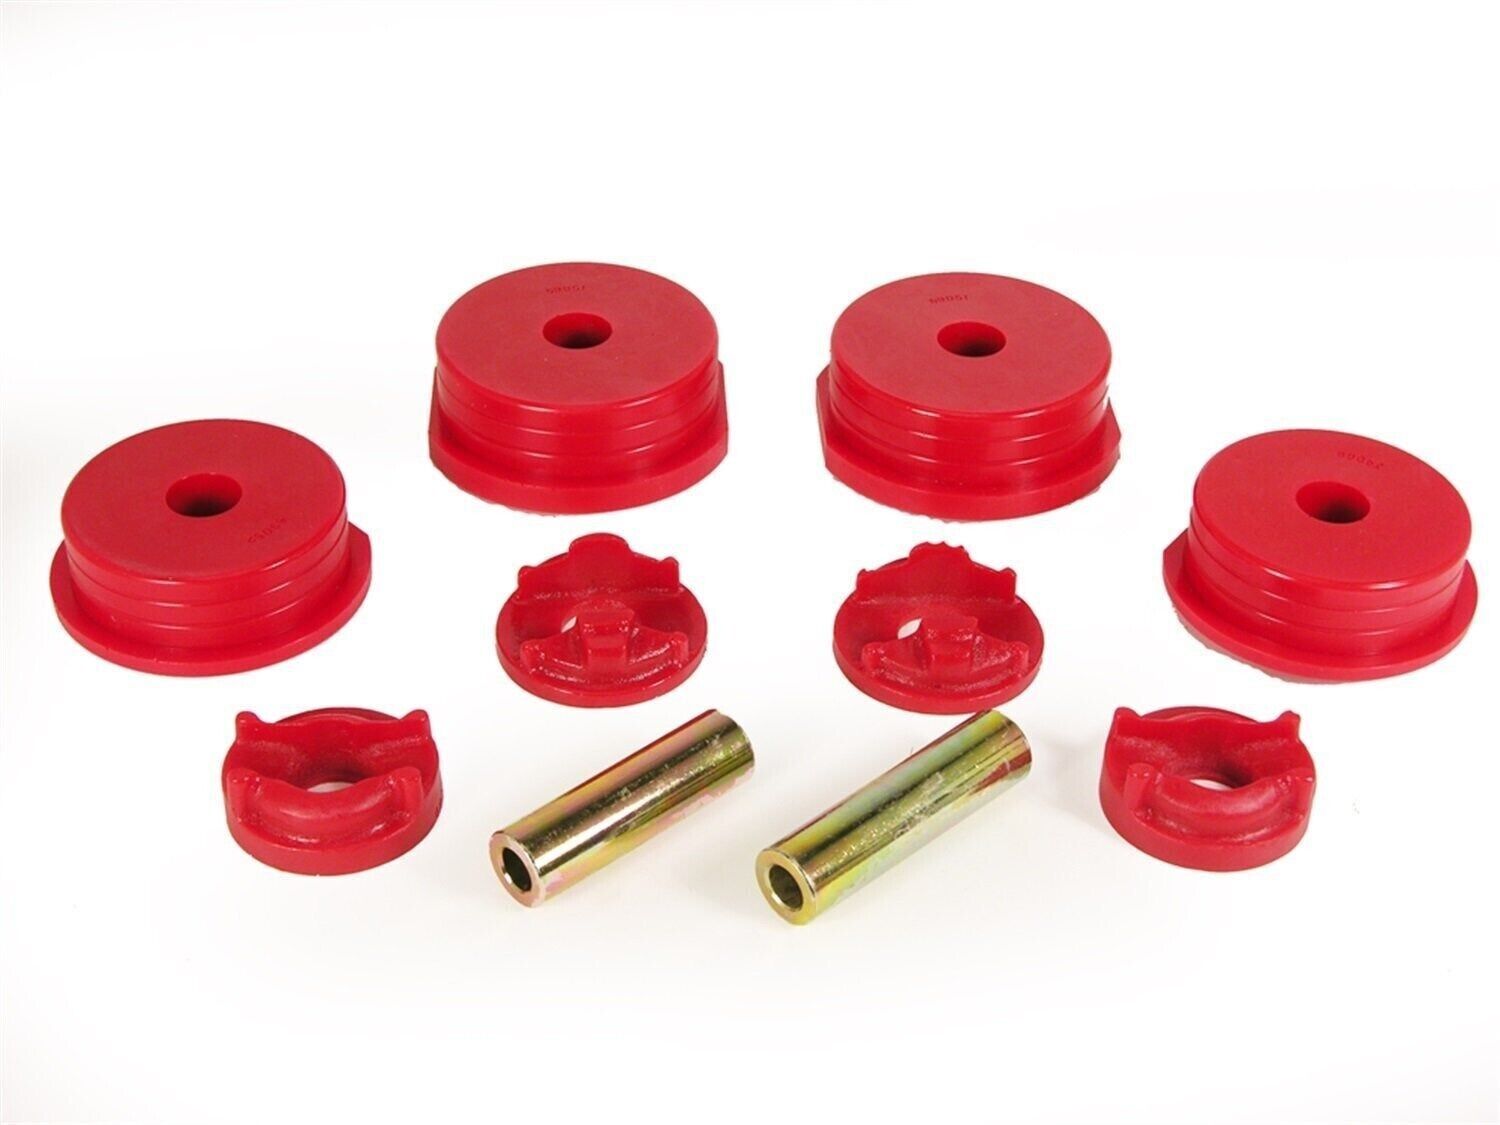 Prothane 13-1901 95-99 Eclipse Eagle Talon 4 Cyl Motor Mount Inserts FWD AWD Red